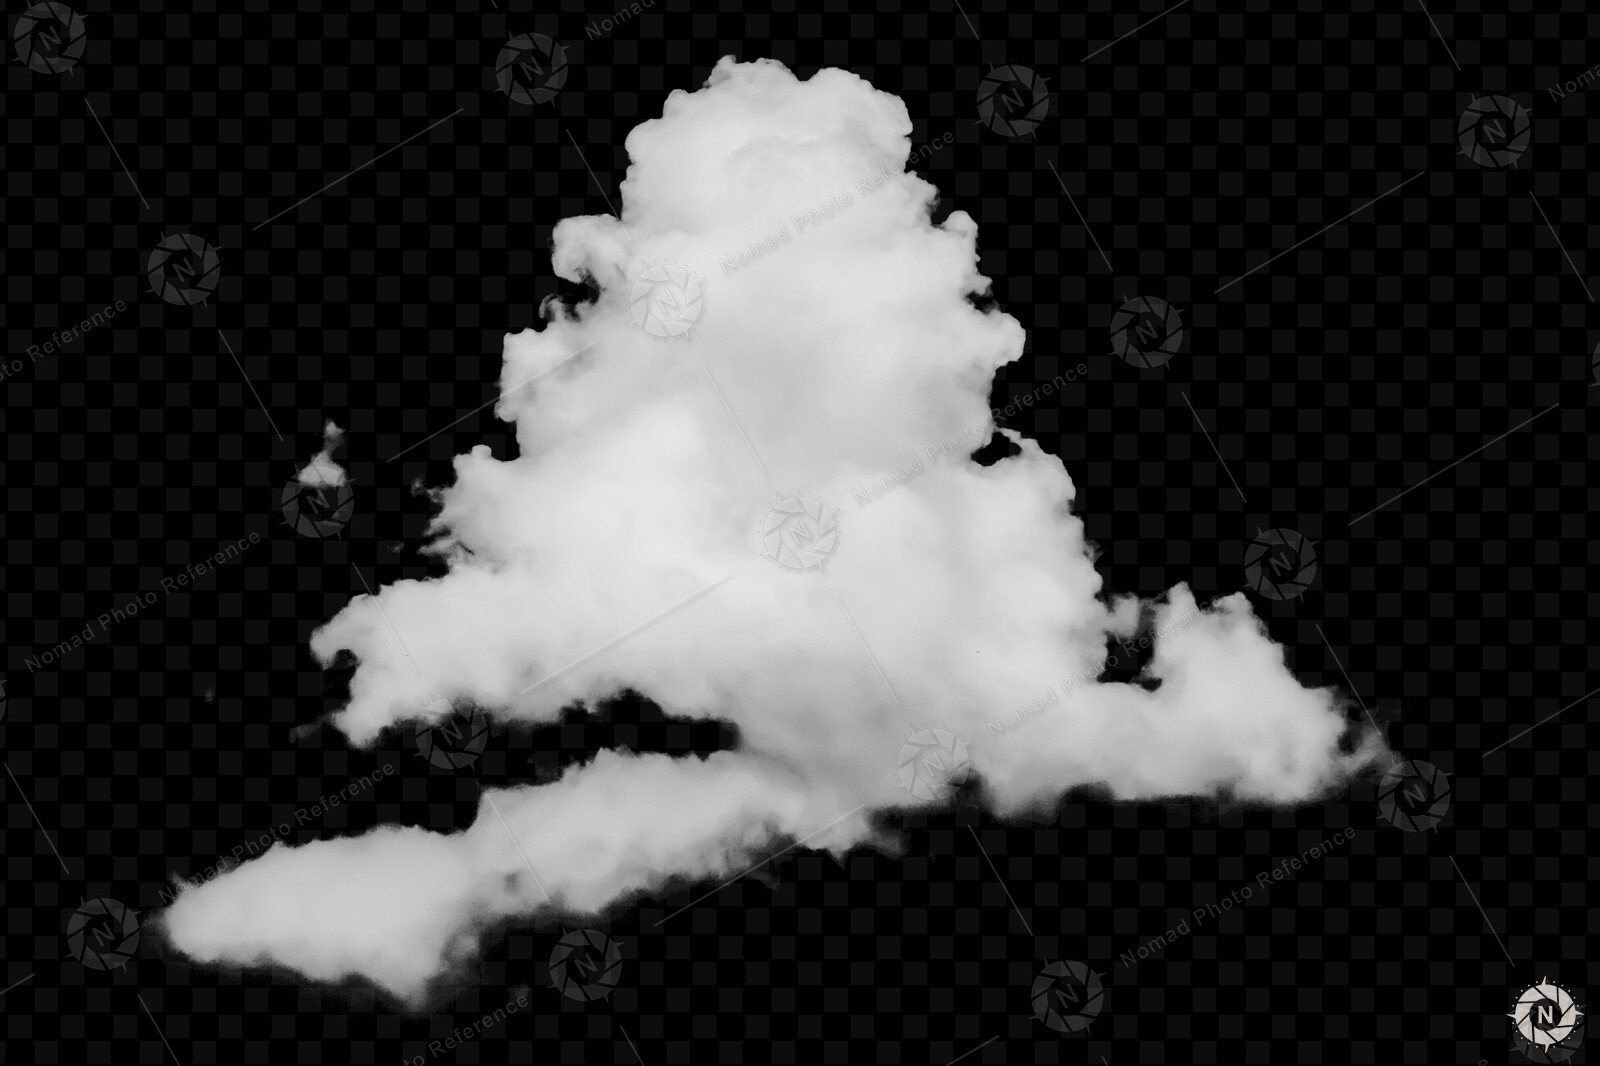 From the PNG Photo Pack: Clouds and Mist volume 3

https://www.artstation.com/a/12353295